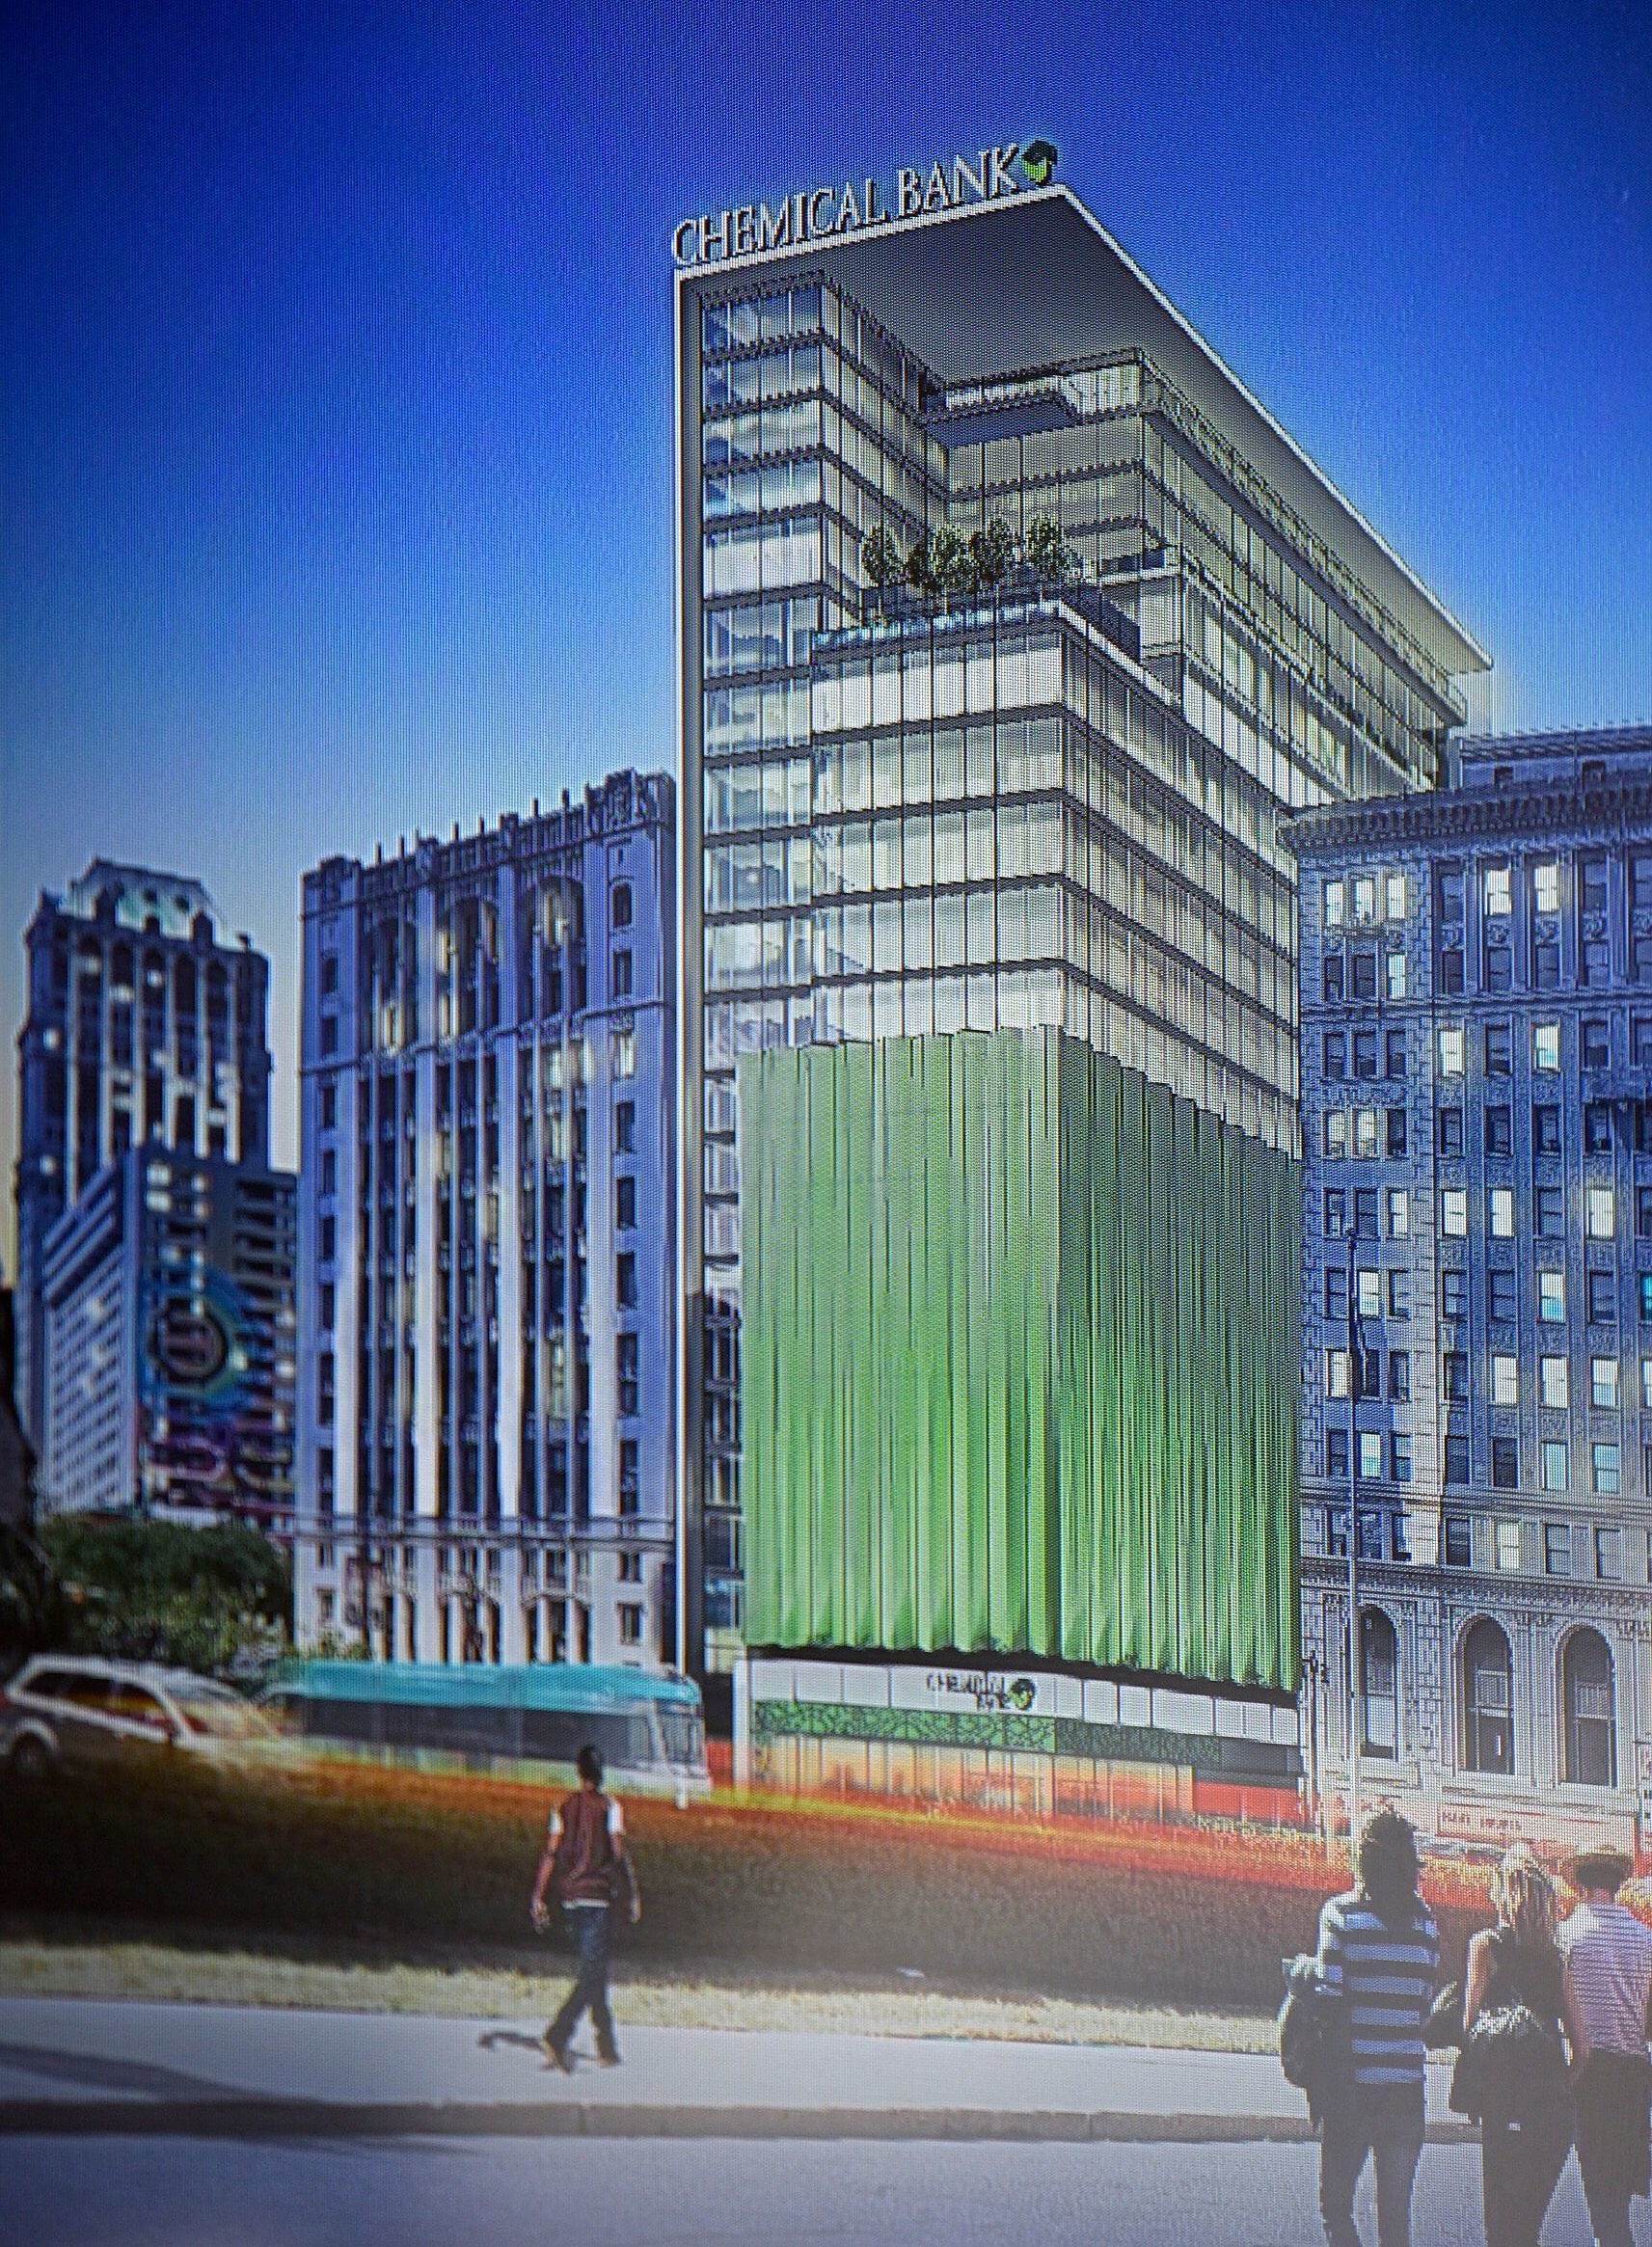 The project to build Chemical Financial Corp.'s new headquarters in downtown Detroit will receive nearly $30 million in incentives.  The incentives will go toward the creation of a $105 million 20-story, mixed-use building at Woodward Avenue and West Elizabeth Street, shown here in an artist rendering.